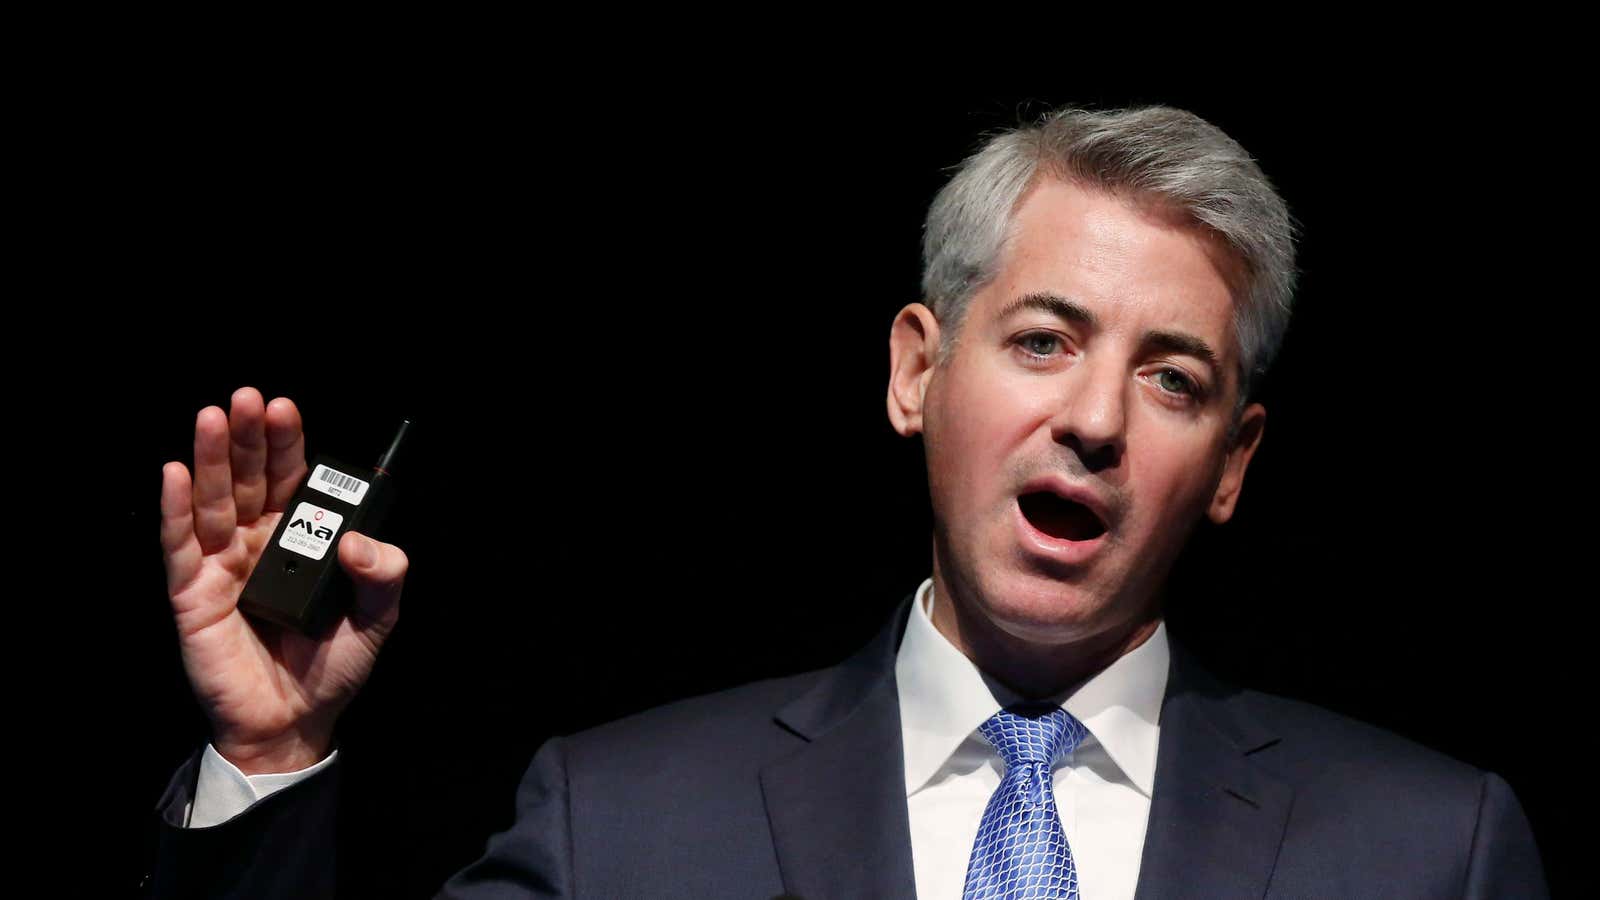 Still a long way to go before Ackman’s bet gets back in the black.